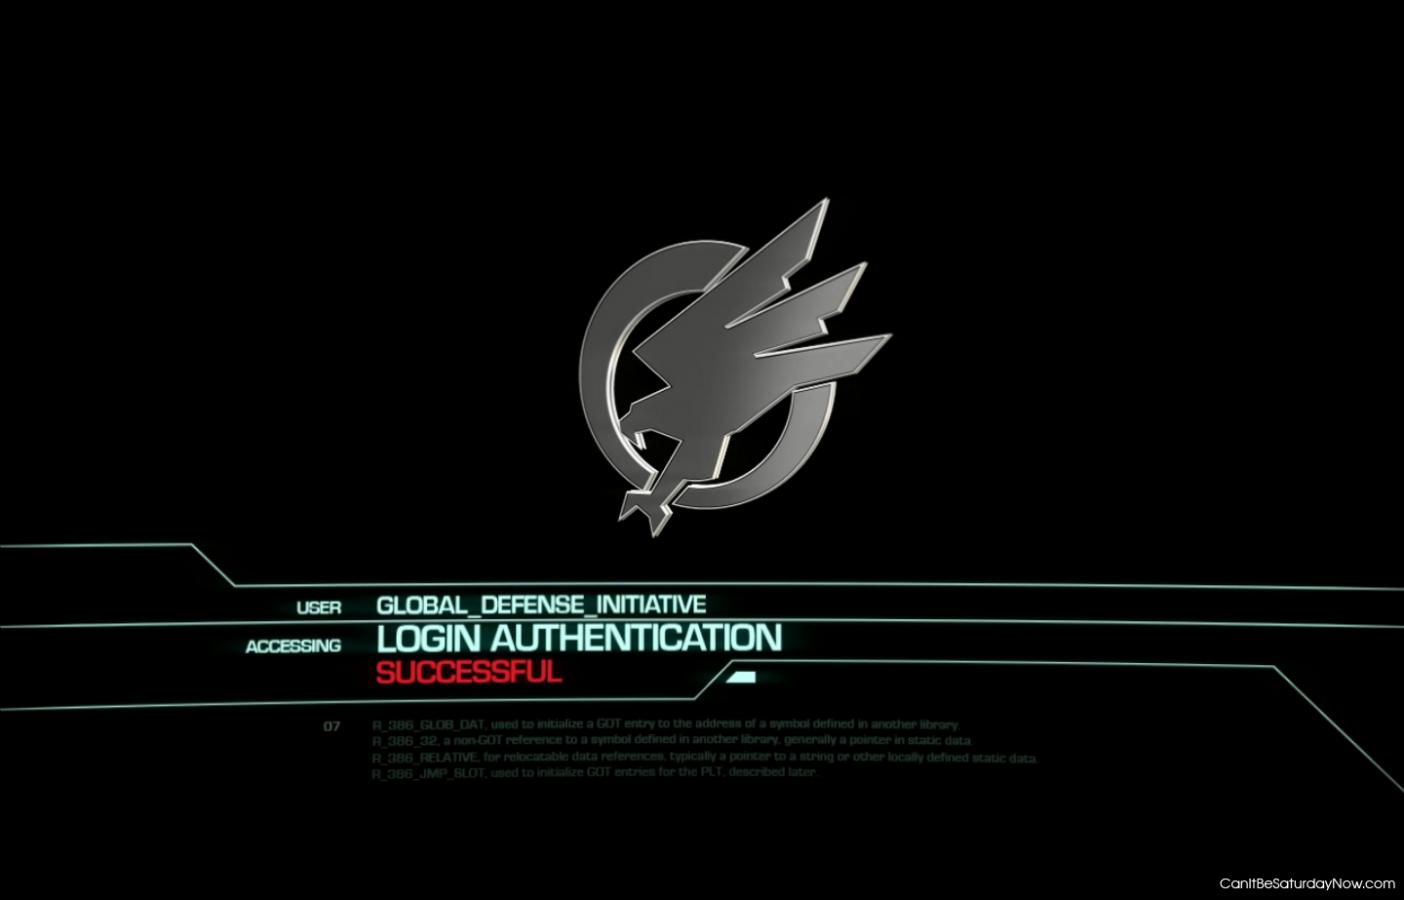 GDI login - desktop made from command and conquer 3